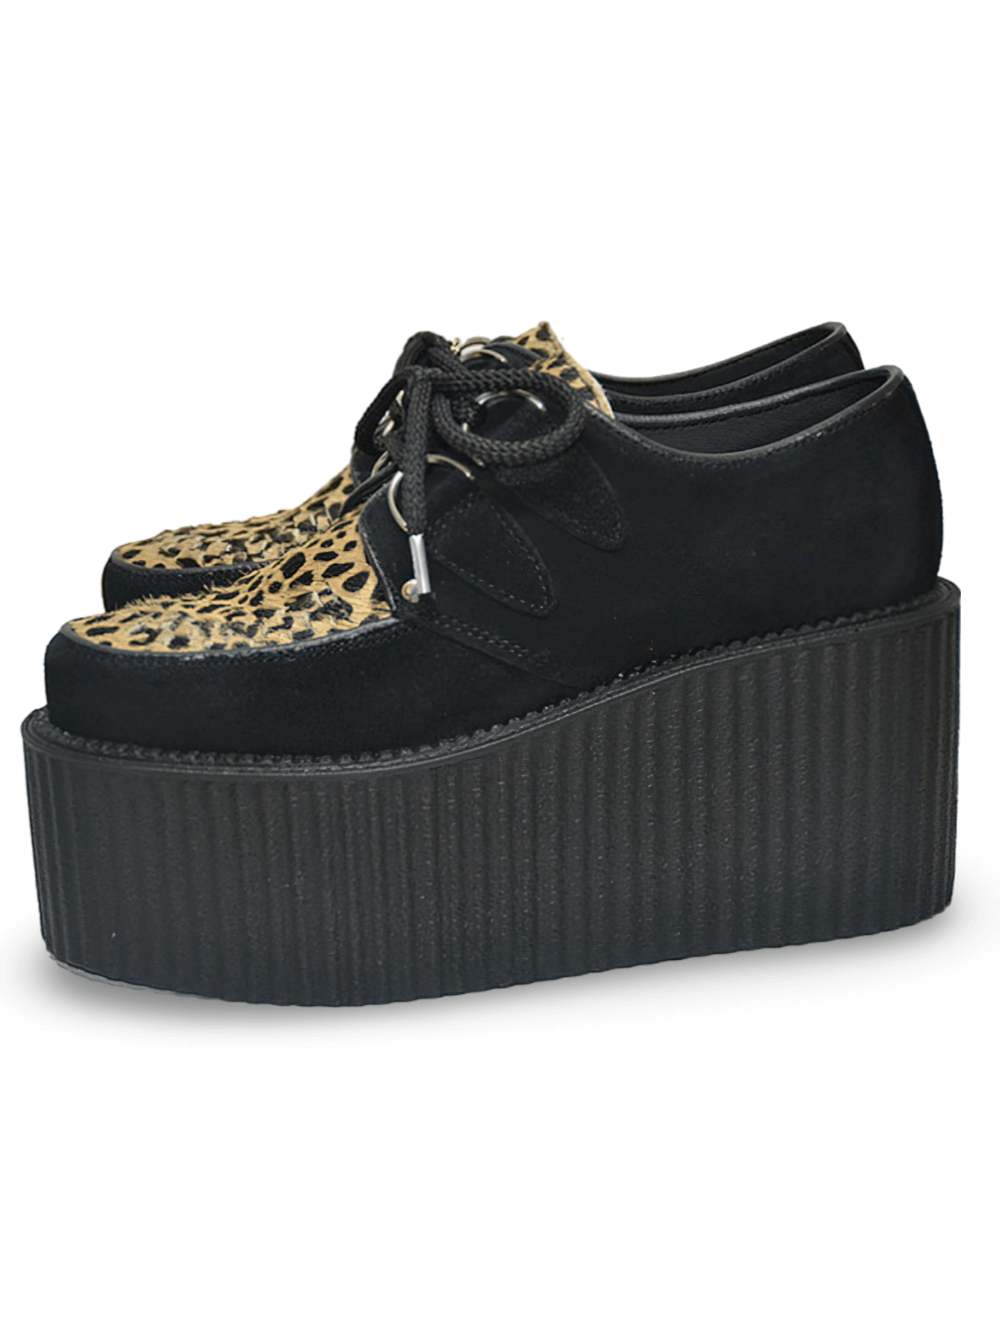 Leopard and Black Suede Creepers with Triple Sole